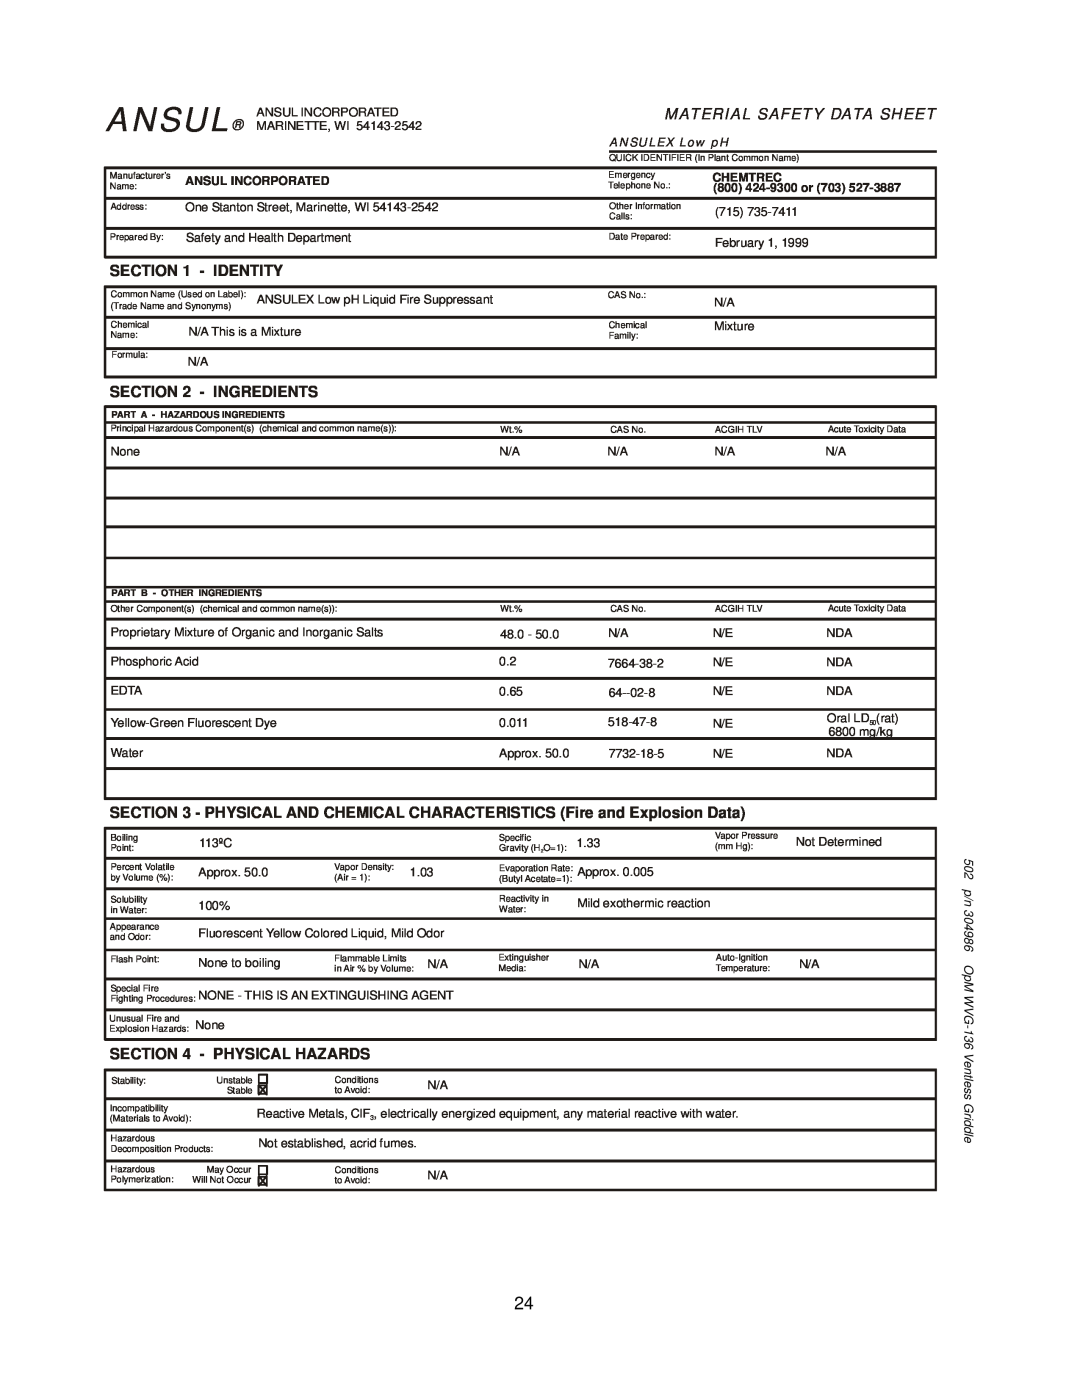 Bloomfield WVG-136RW Ansul, Material Safety Data Sheet, Identity, Ingredients, Physical Hazards, ANSULEX Low pH, Chemtrec 